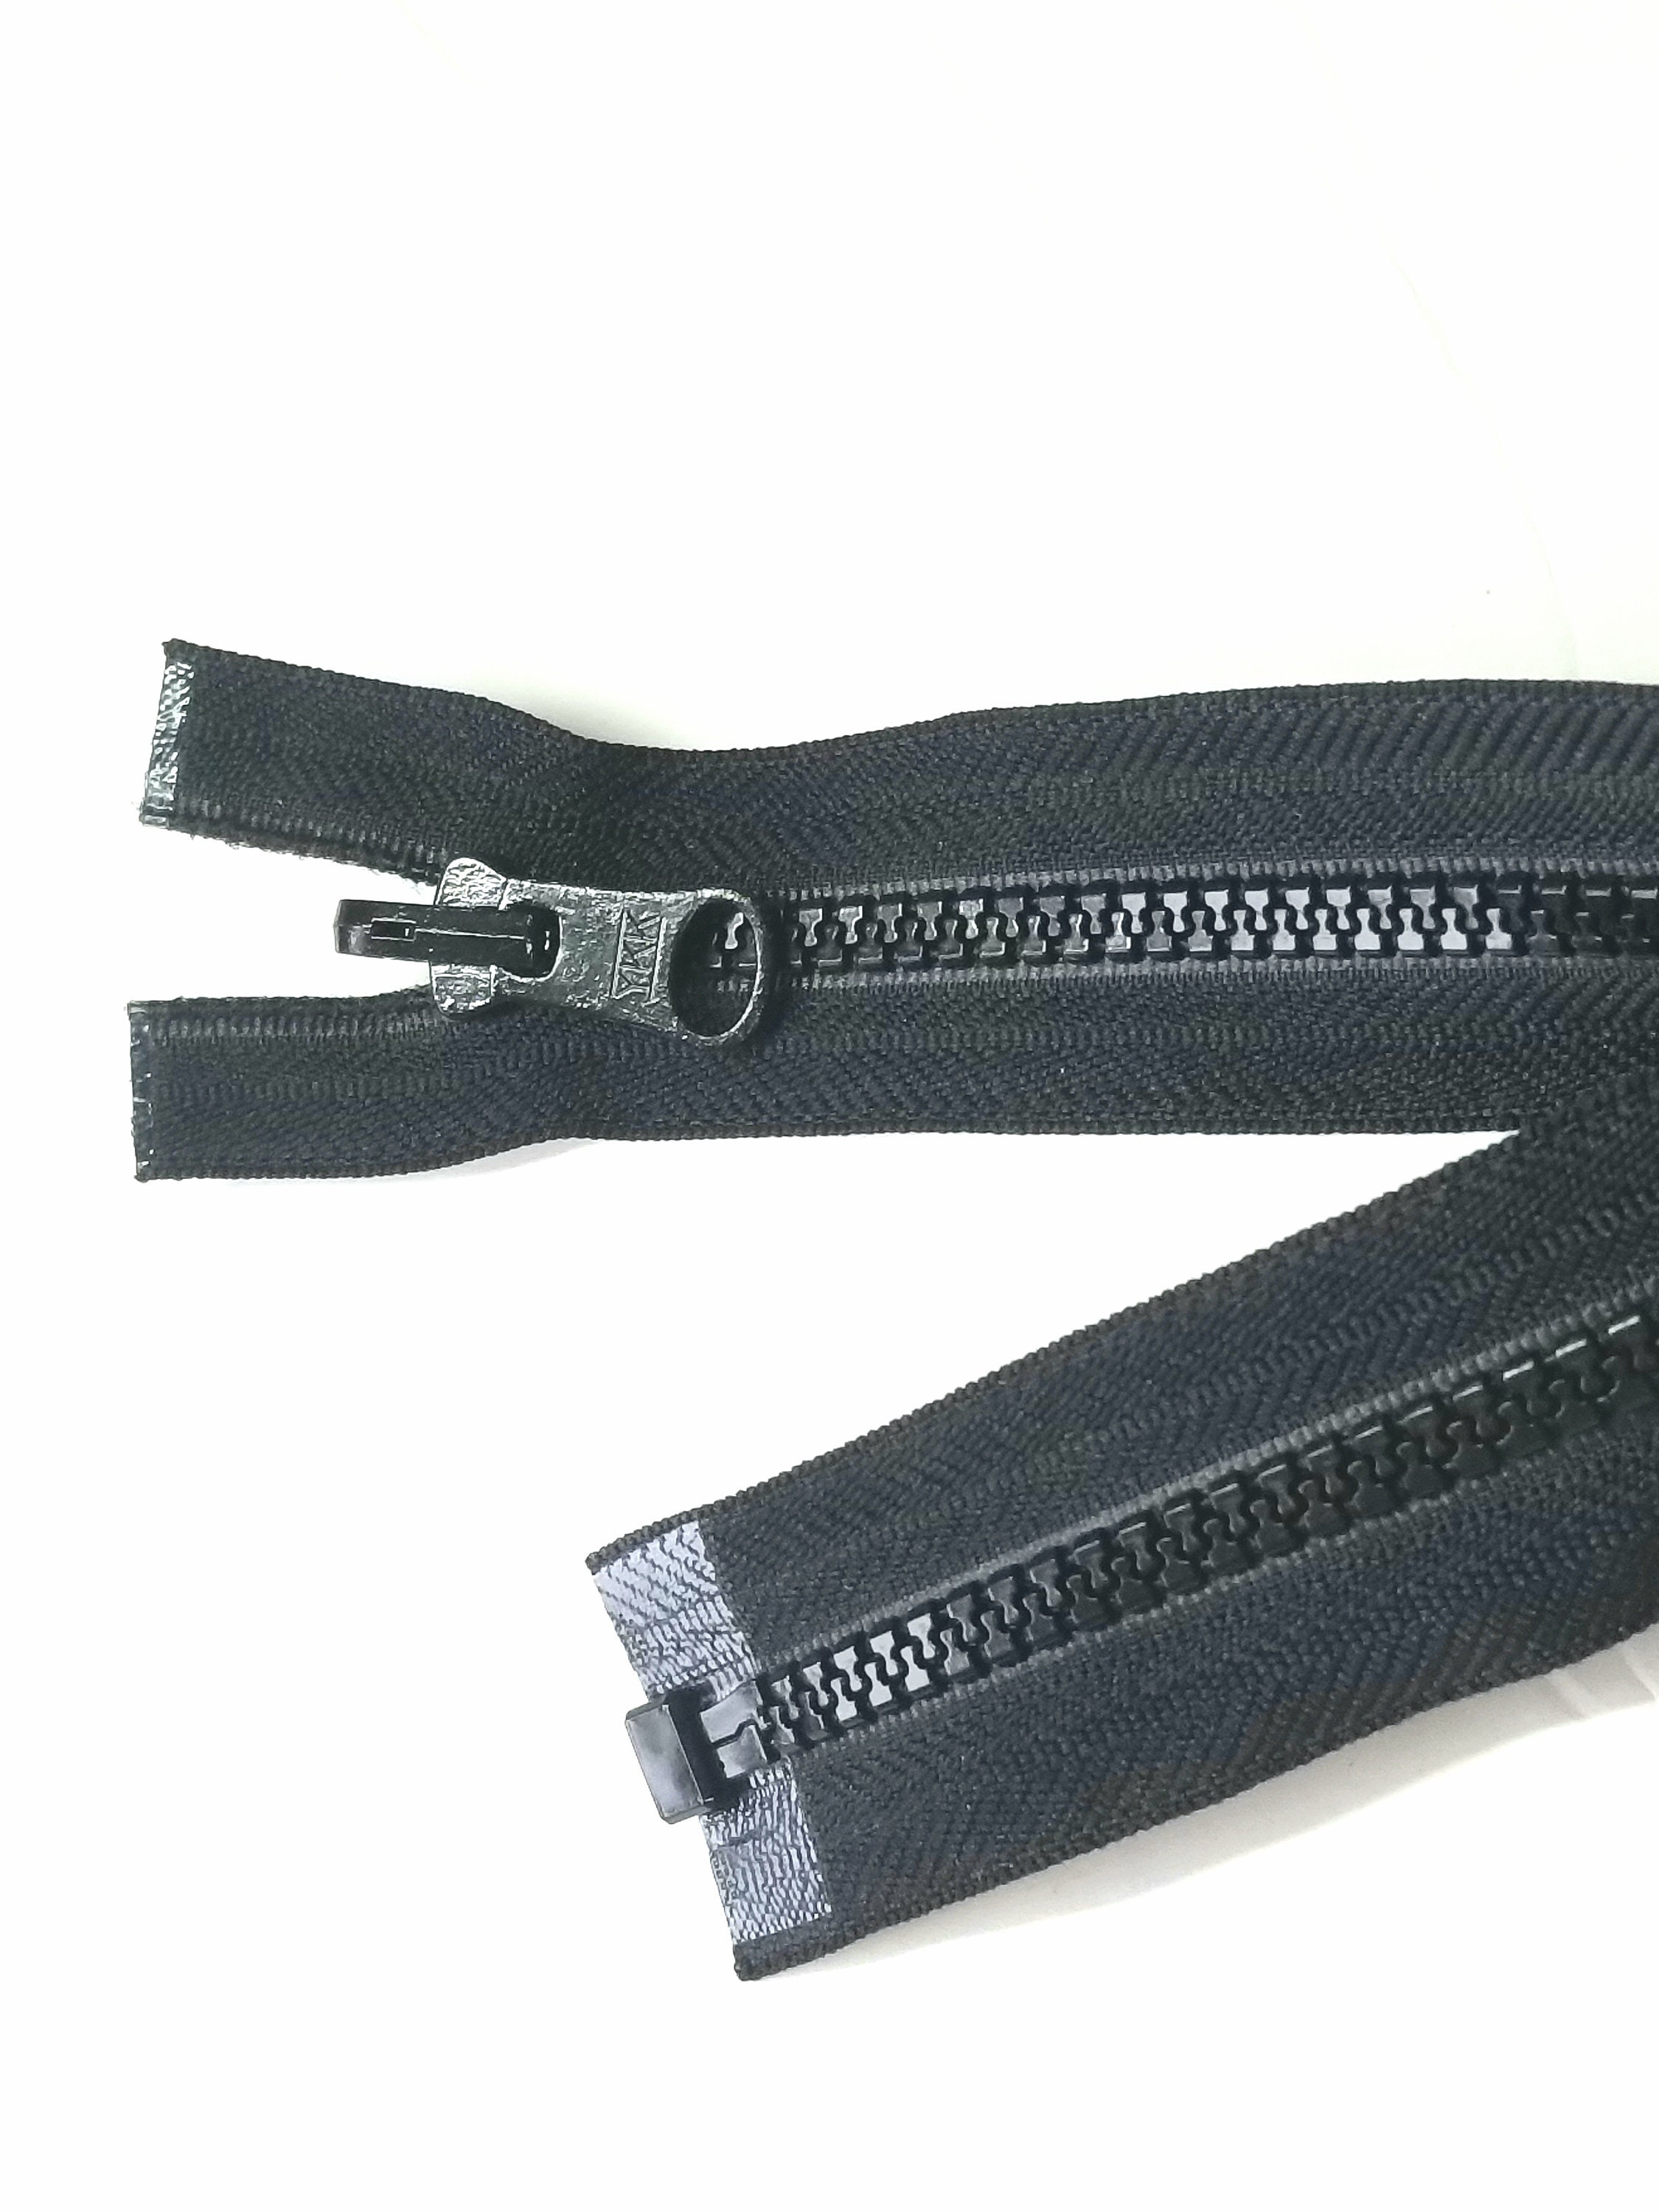 Reversible Separating Zippers #5 Medium Weight Separating Reversible Zippers  [Reversible Separating Zippers] - $5.79 : Buy Cheap & Discount Fashion  Fabric Online